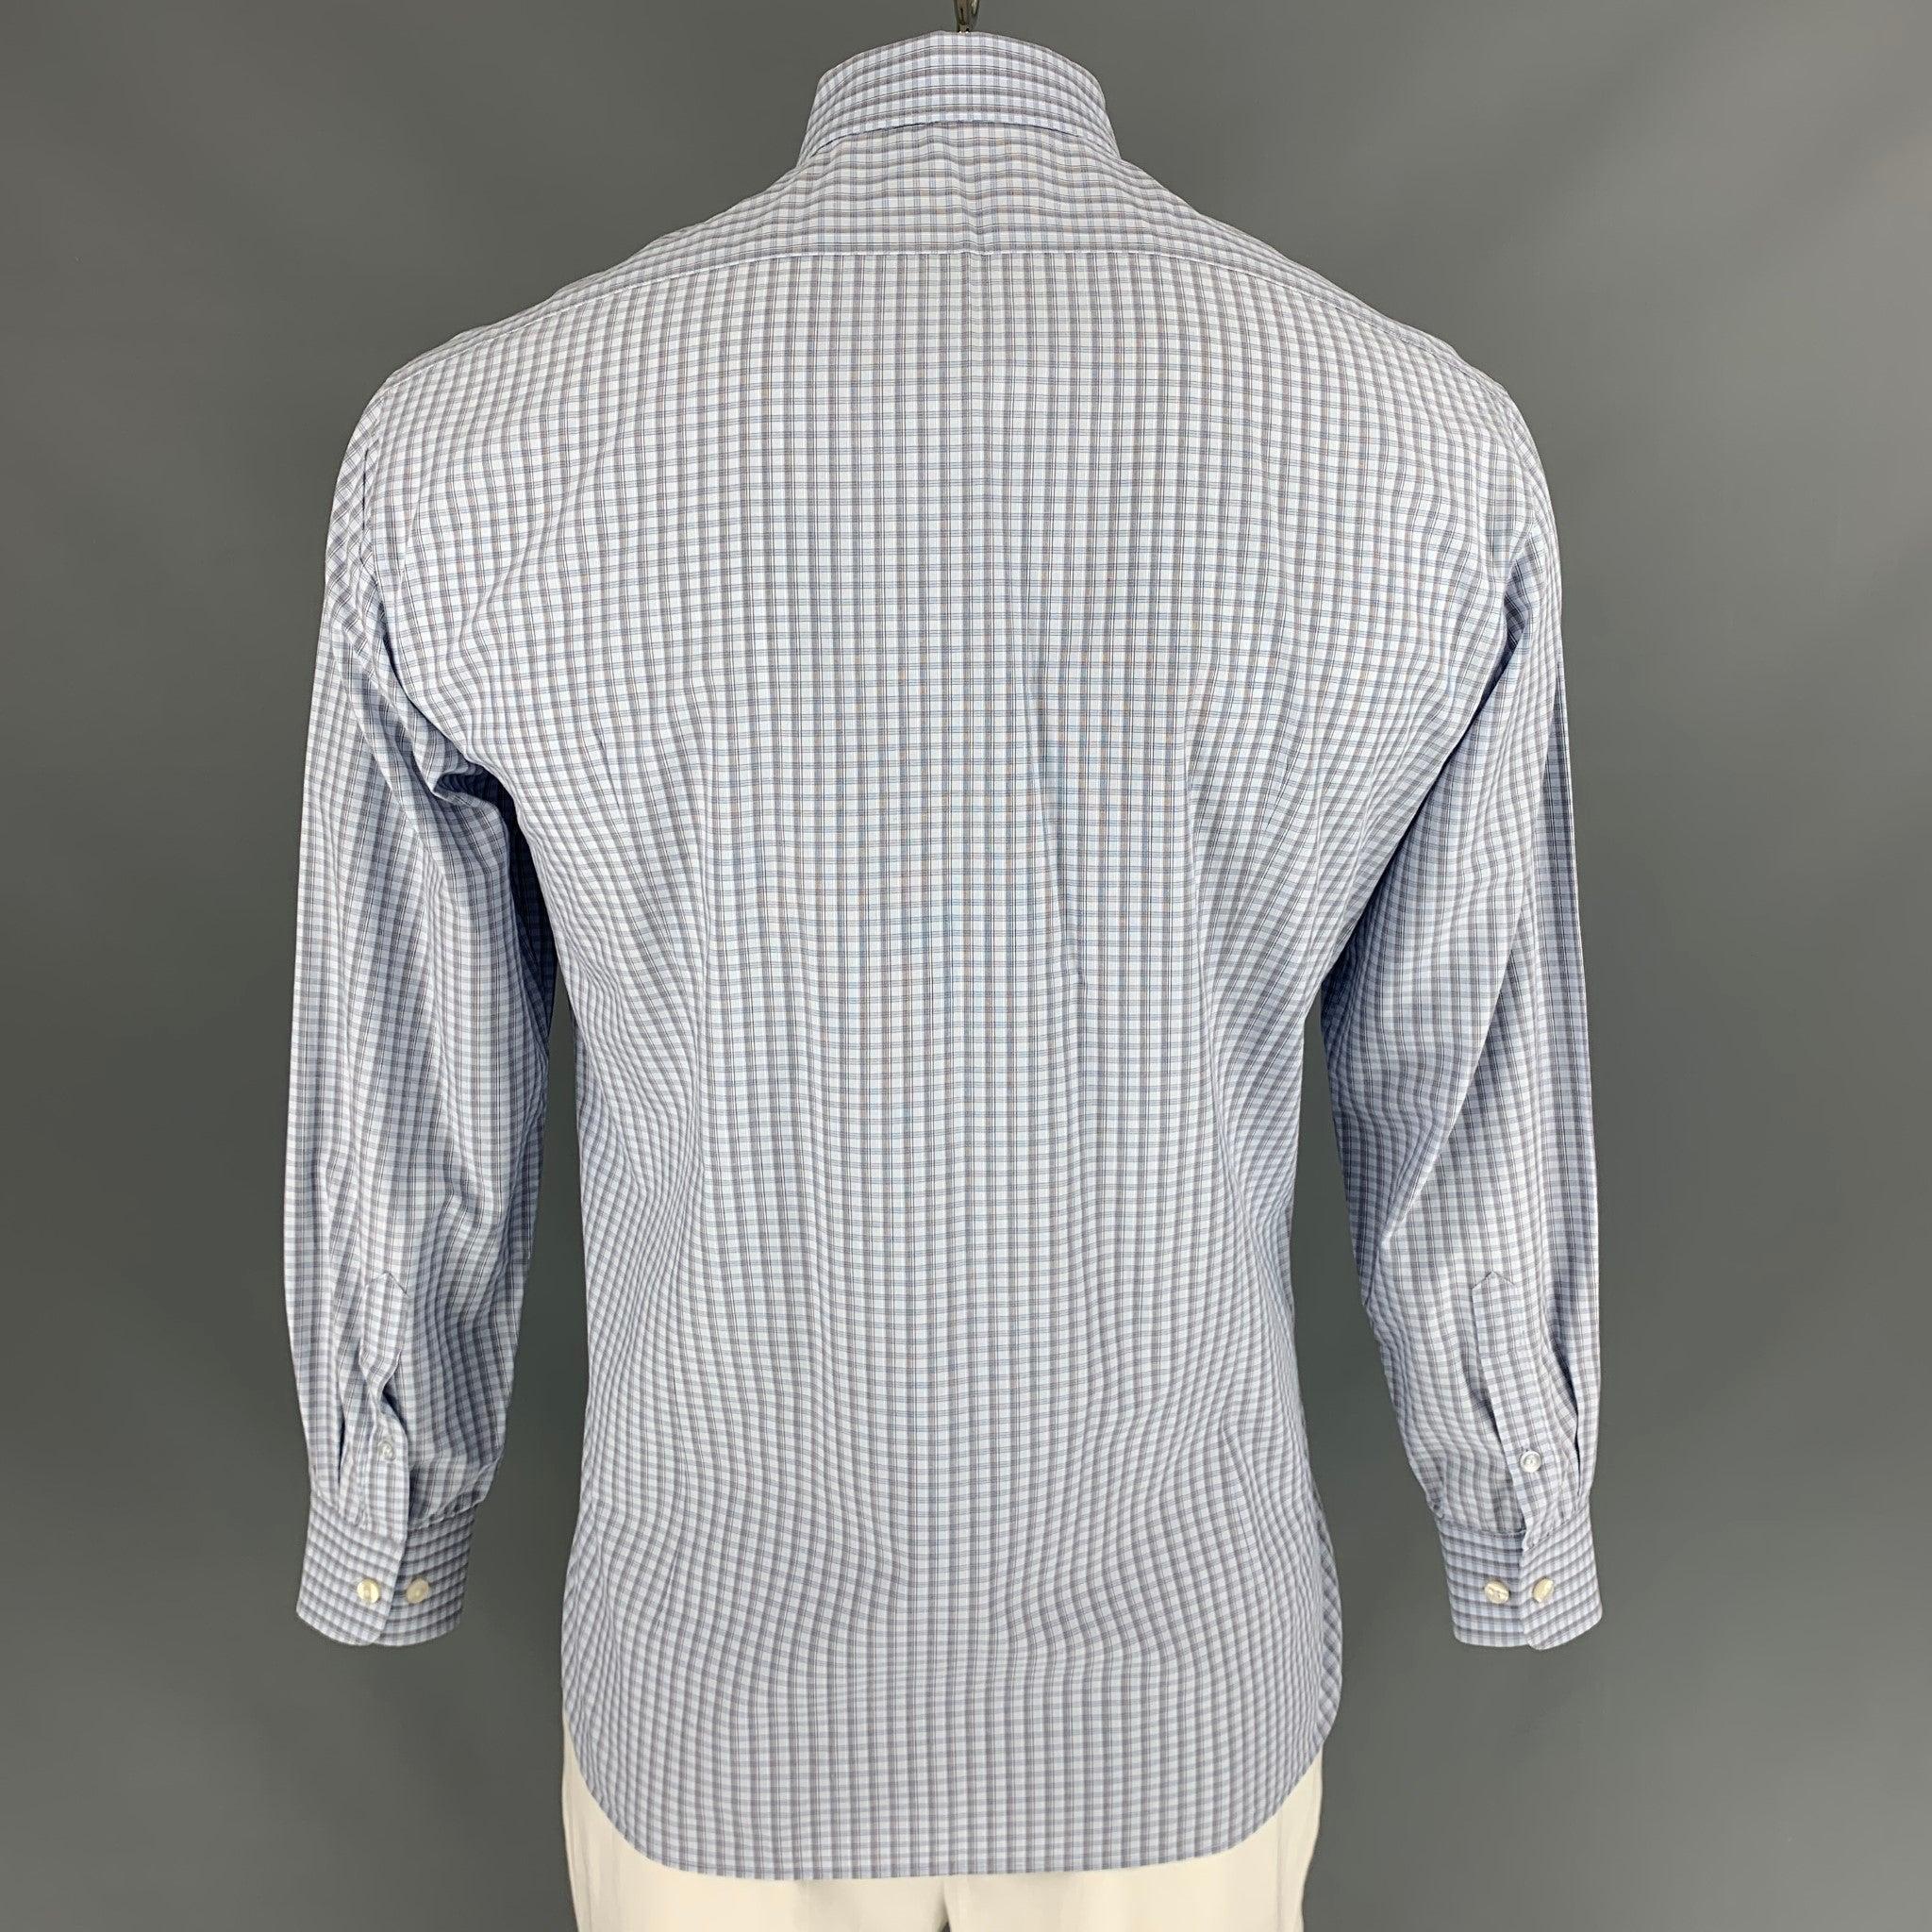 JOHN VARVATOS Size L Blue & Grey Plaid Cotton Button Down Long Sleeve Shirt In Good Condition For Sale In San Francisco, CA